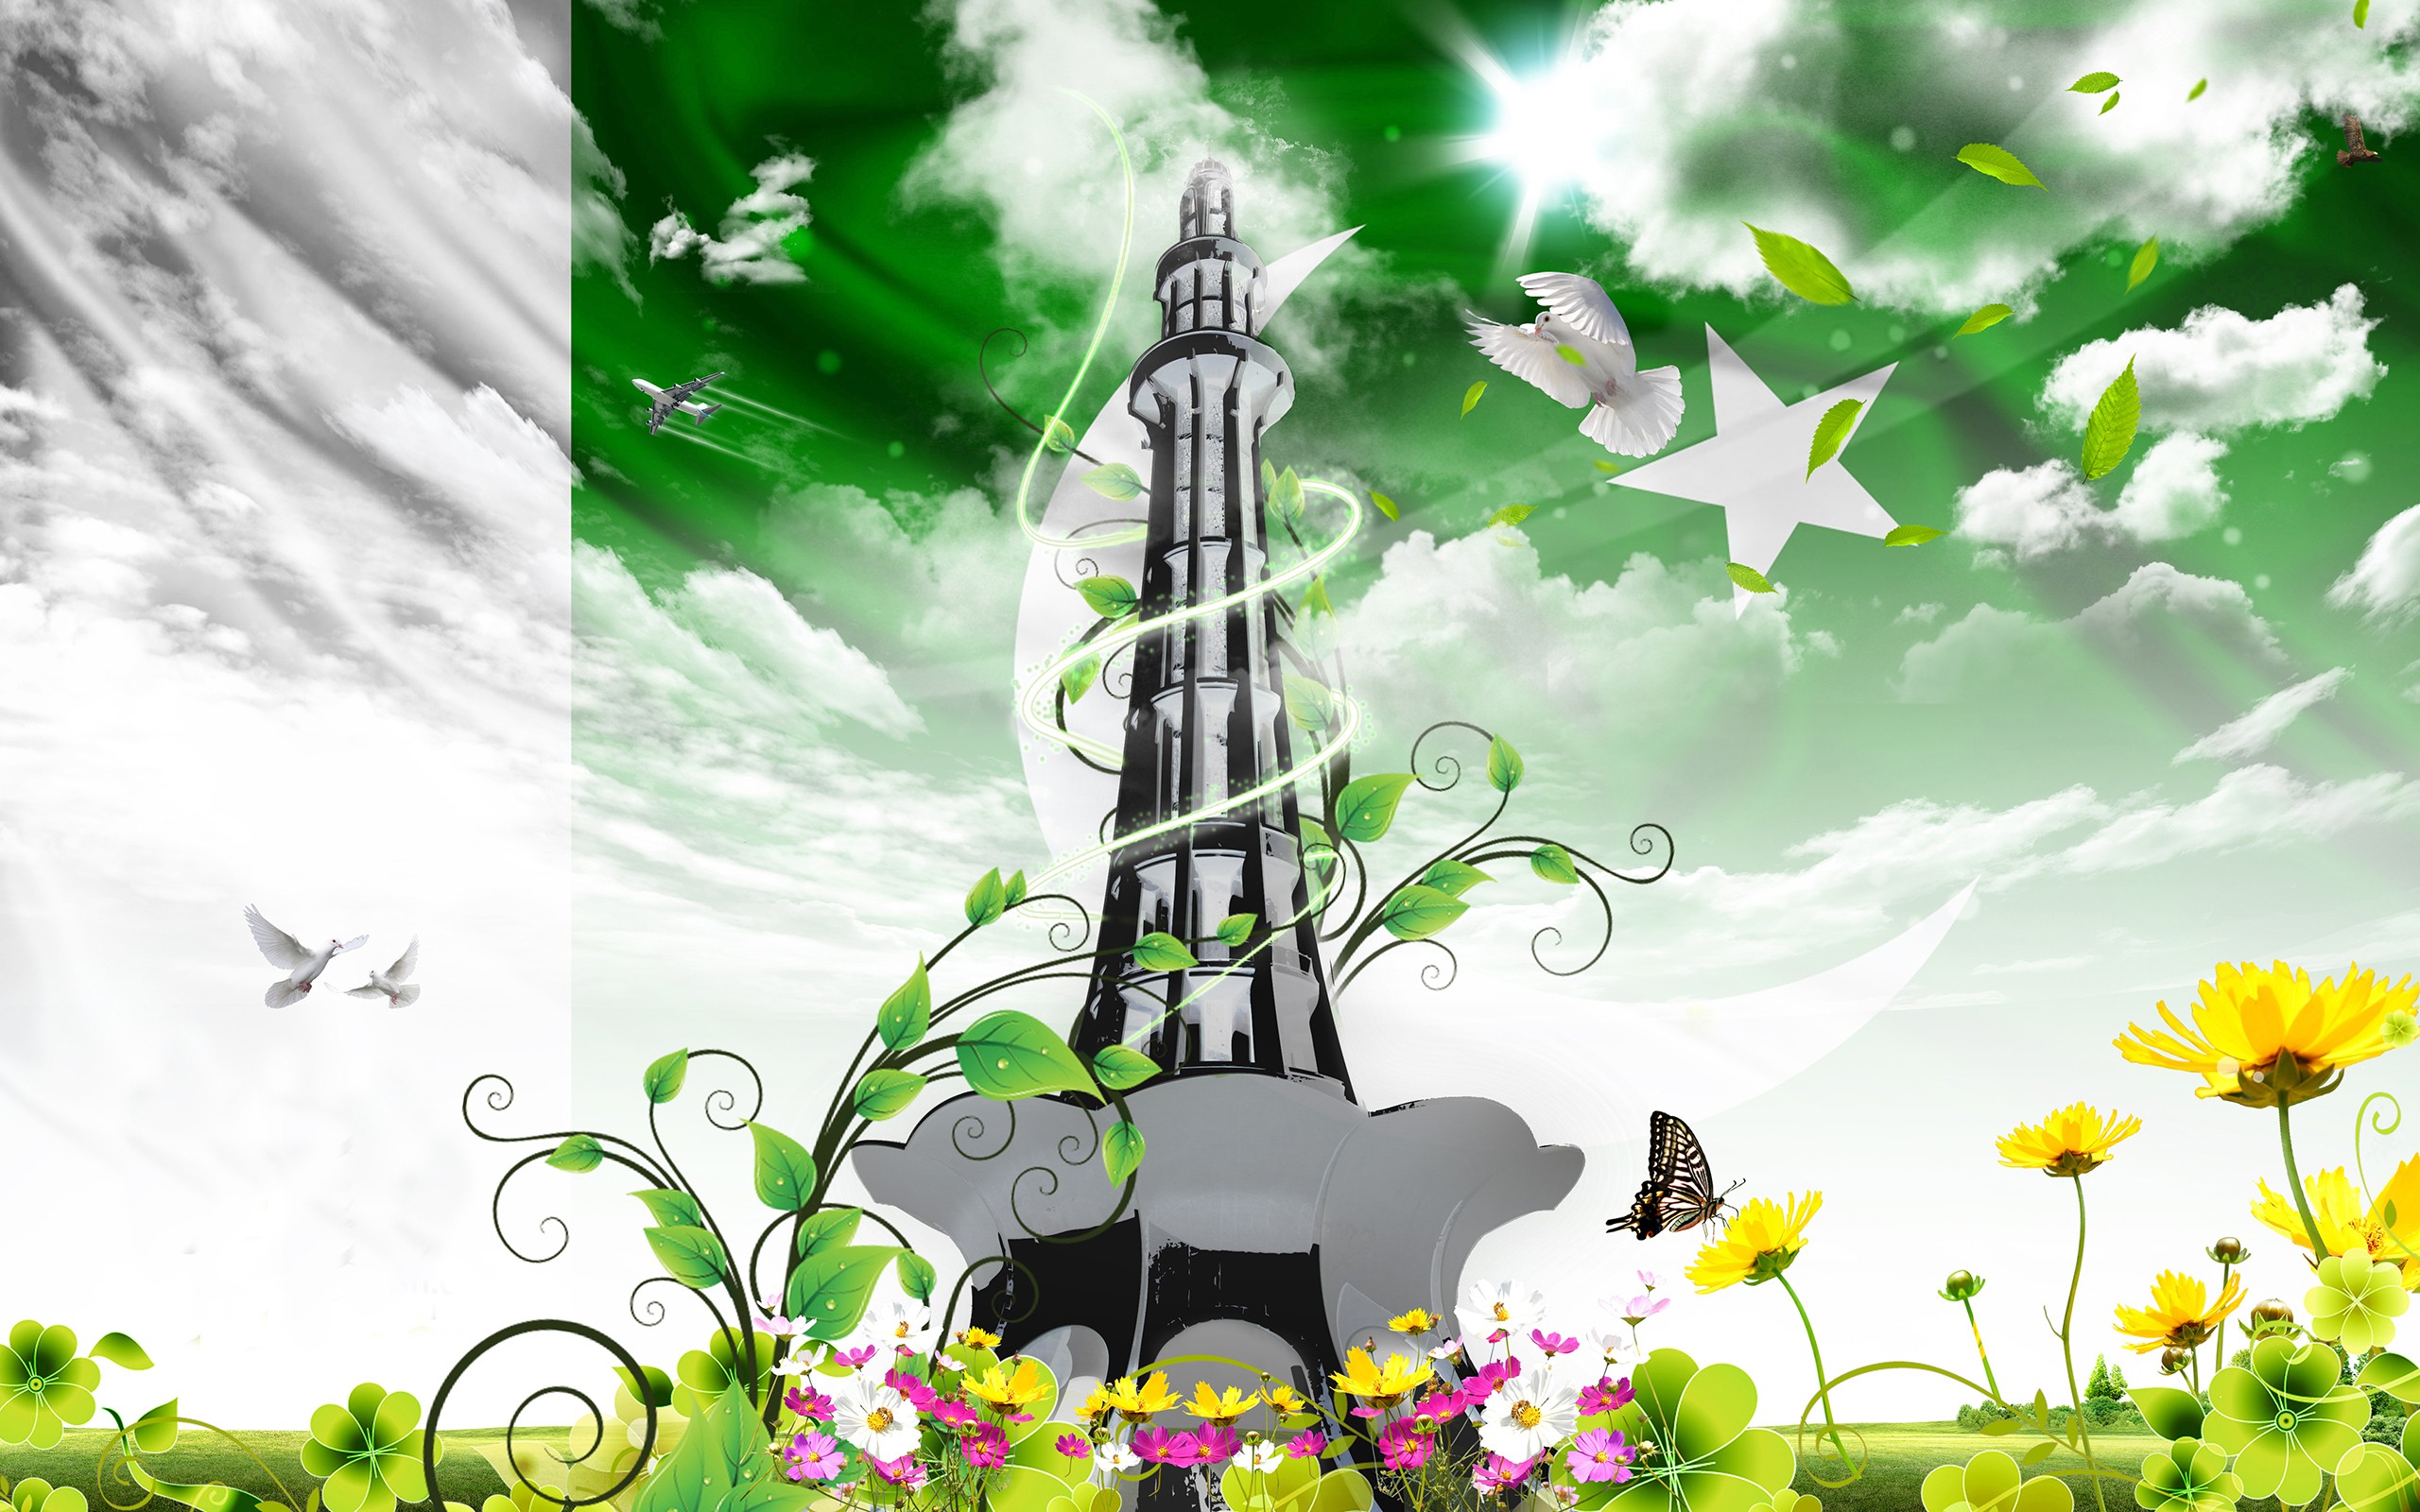 Download wallpapers I Love Pakistan 4k realistic balloons green wooden  background Asian countries Pakistani flag heart favorite countries flag  of Pakistan balloon with flag Pakistani flag Pakistan Love Pakistan for  desktop free